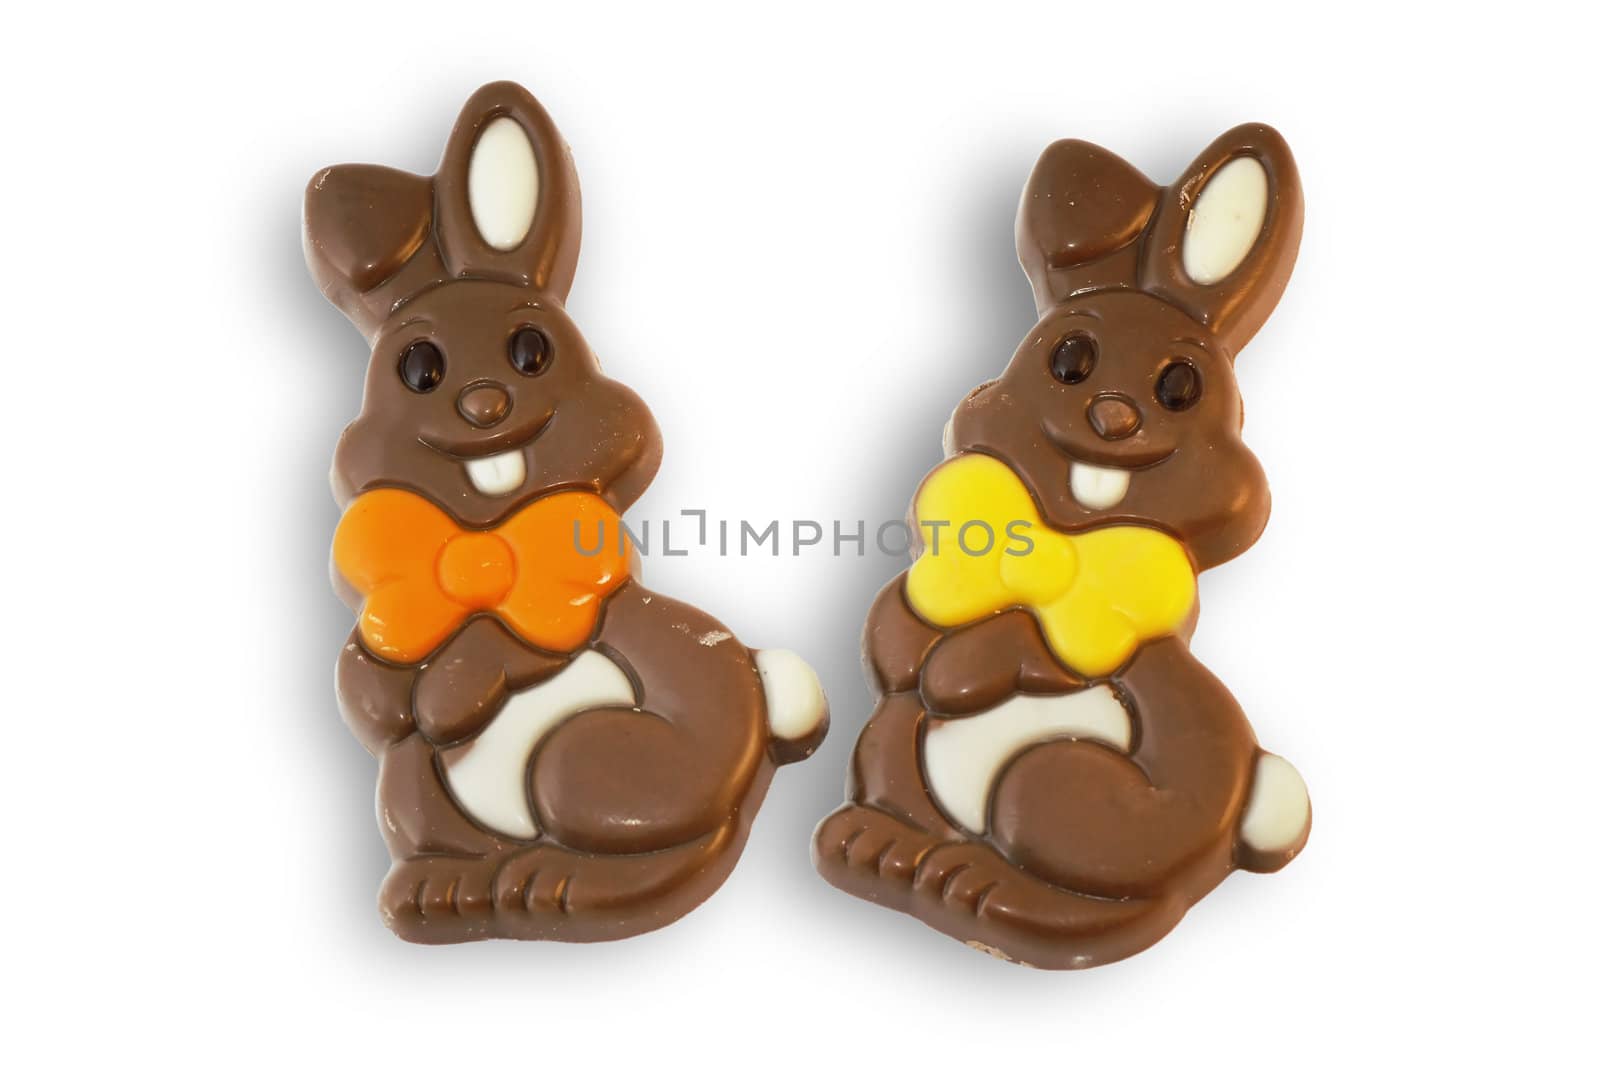 Cute and fun chocolate Easter bunnies or rabbits, on white background.